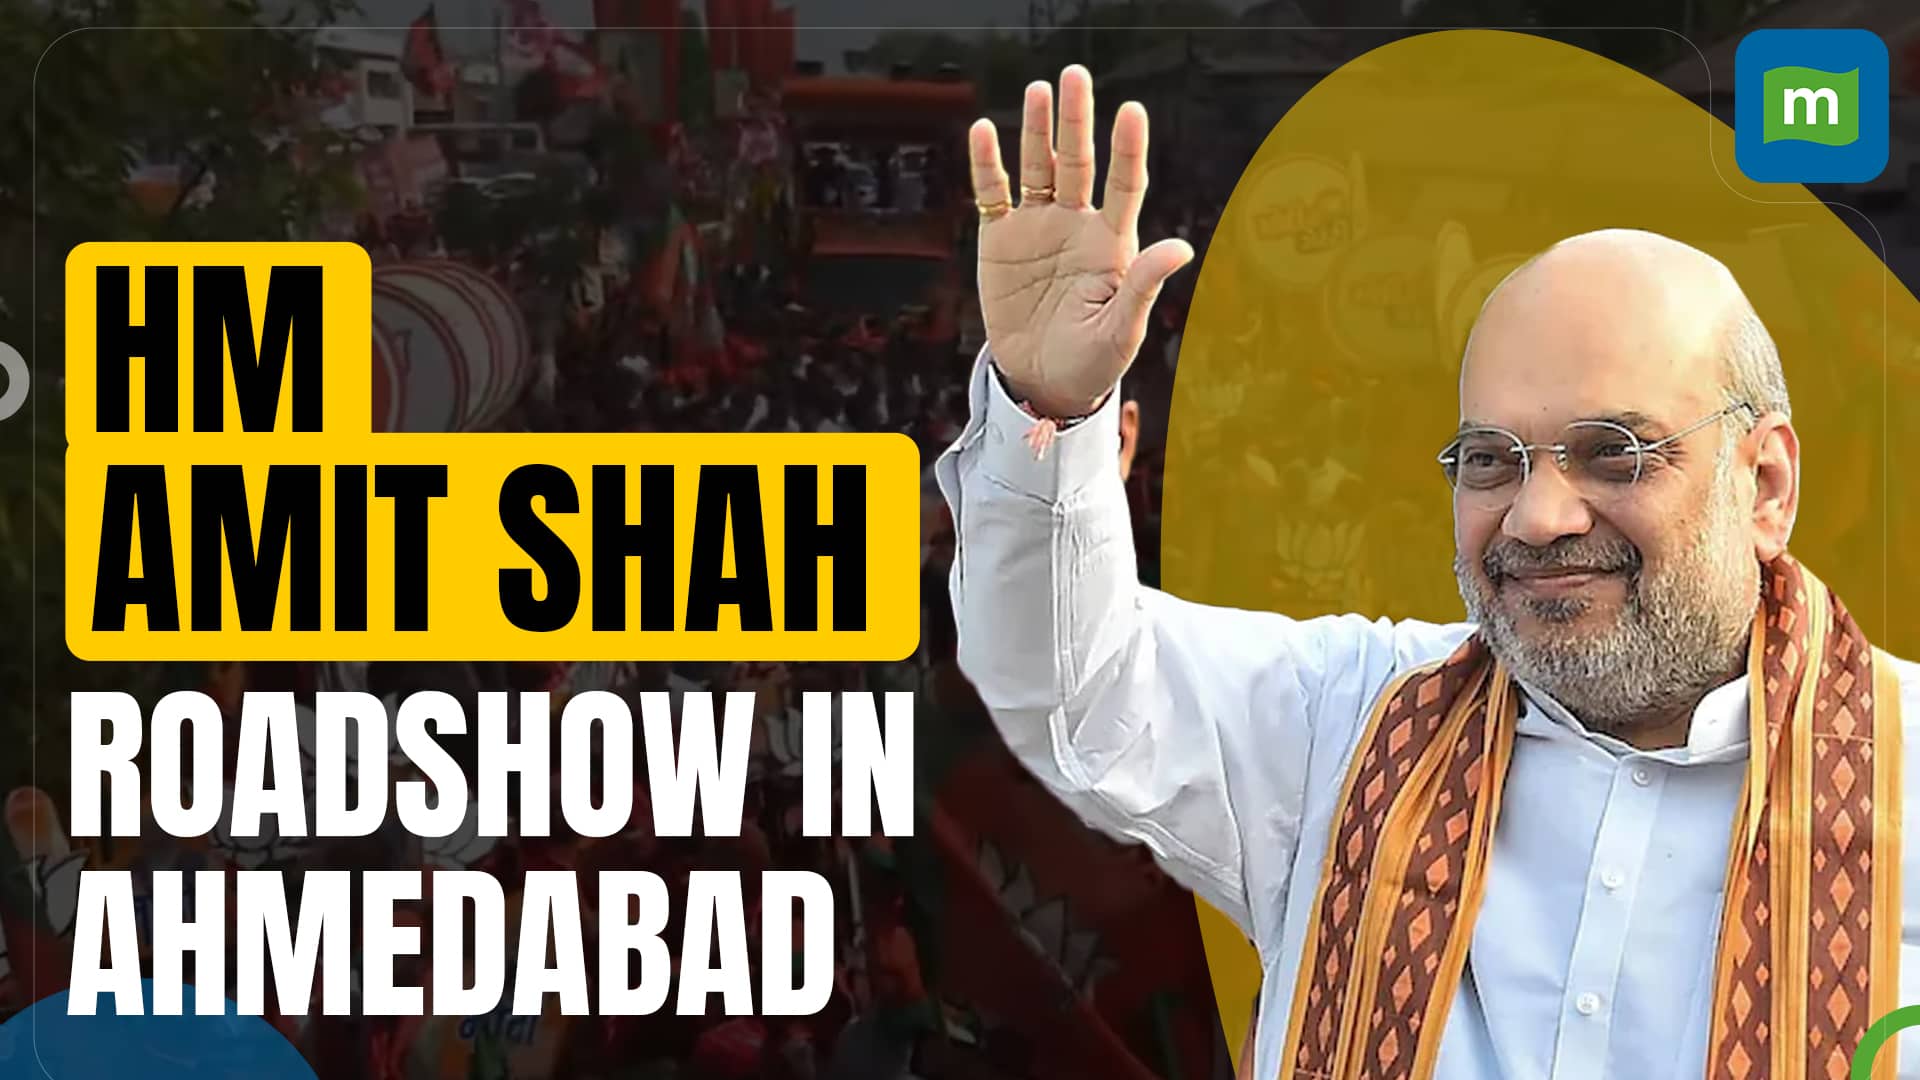 Amit Shah roadshow: Sea of people turn up to get a glimpse of the BJP leader